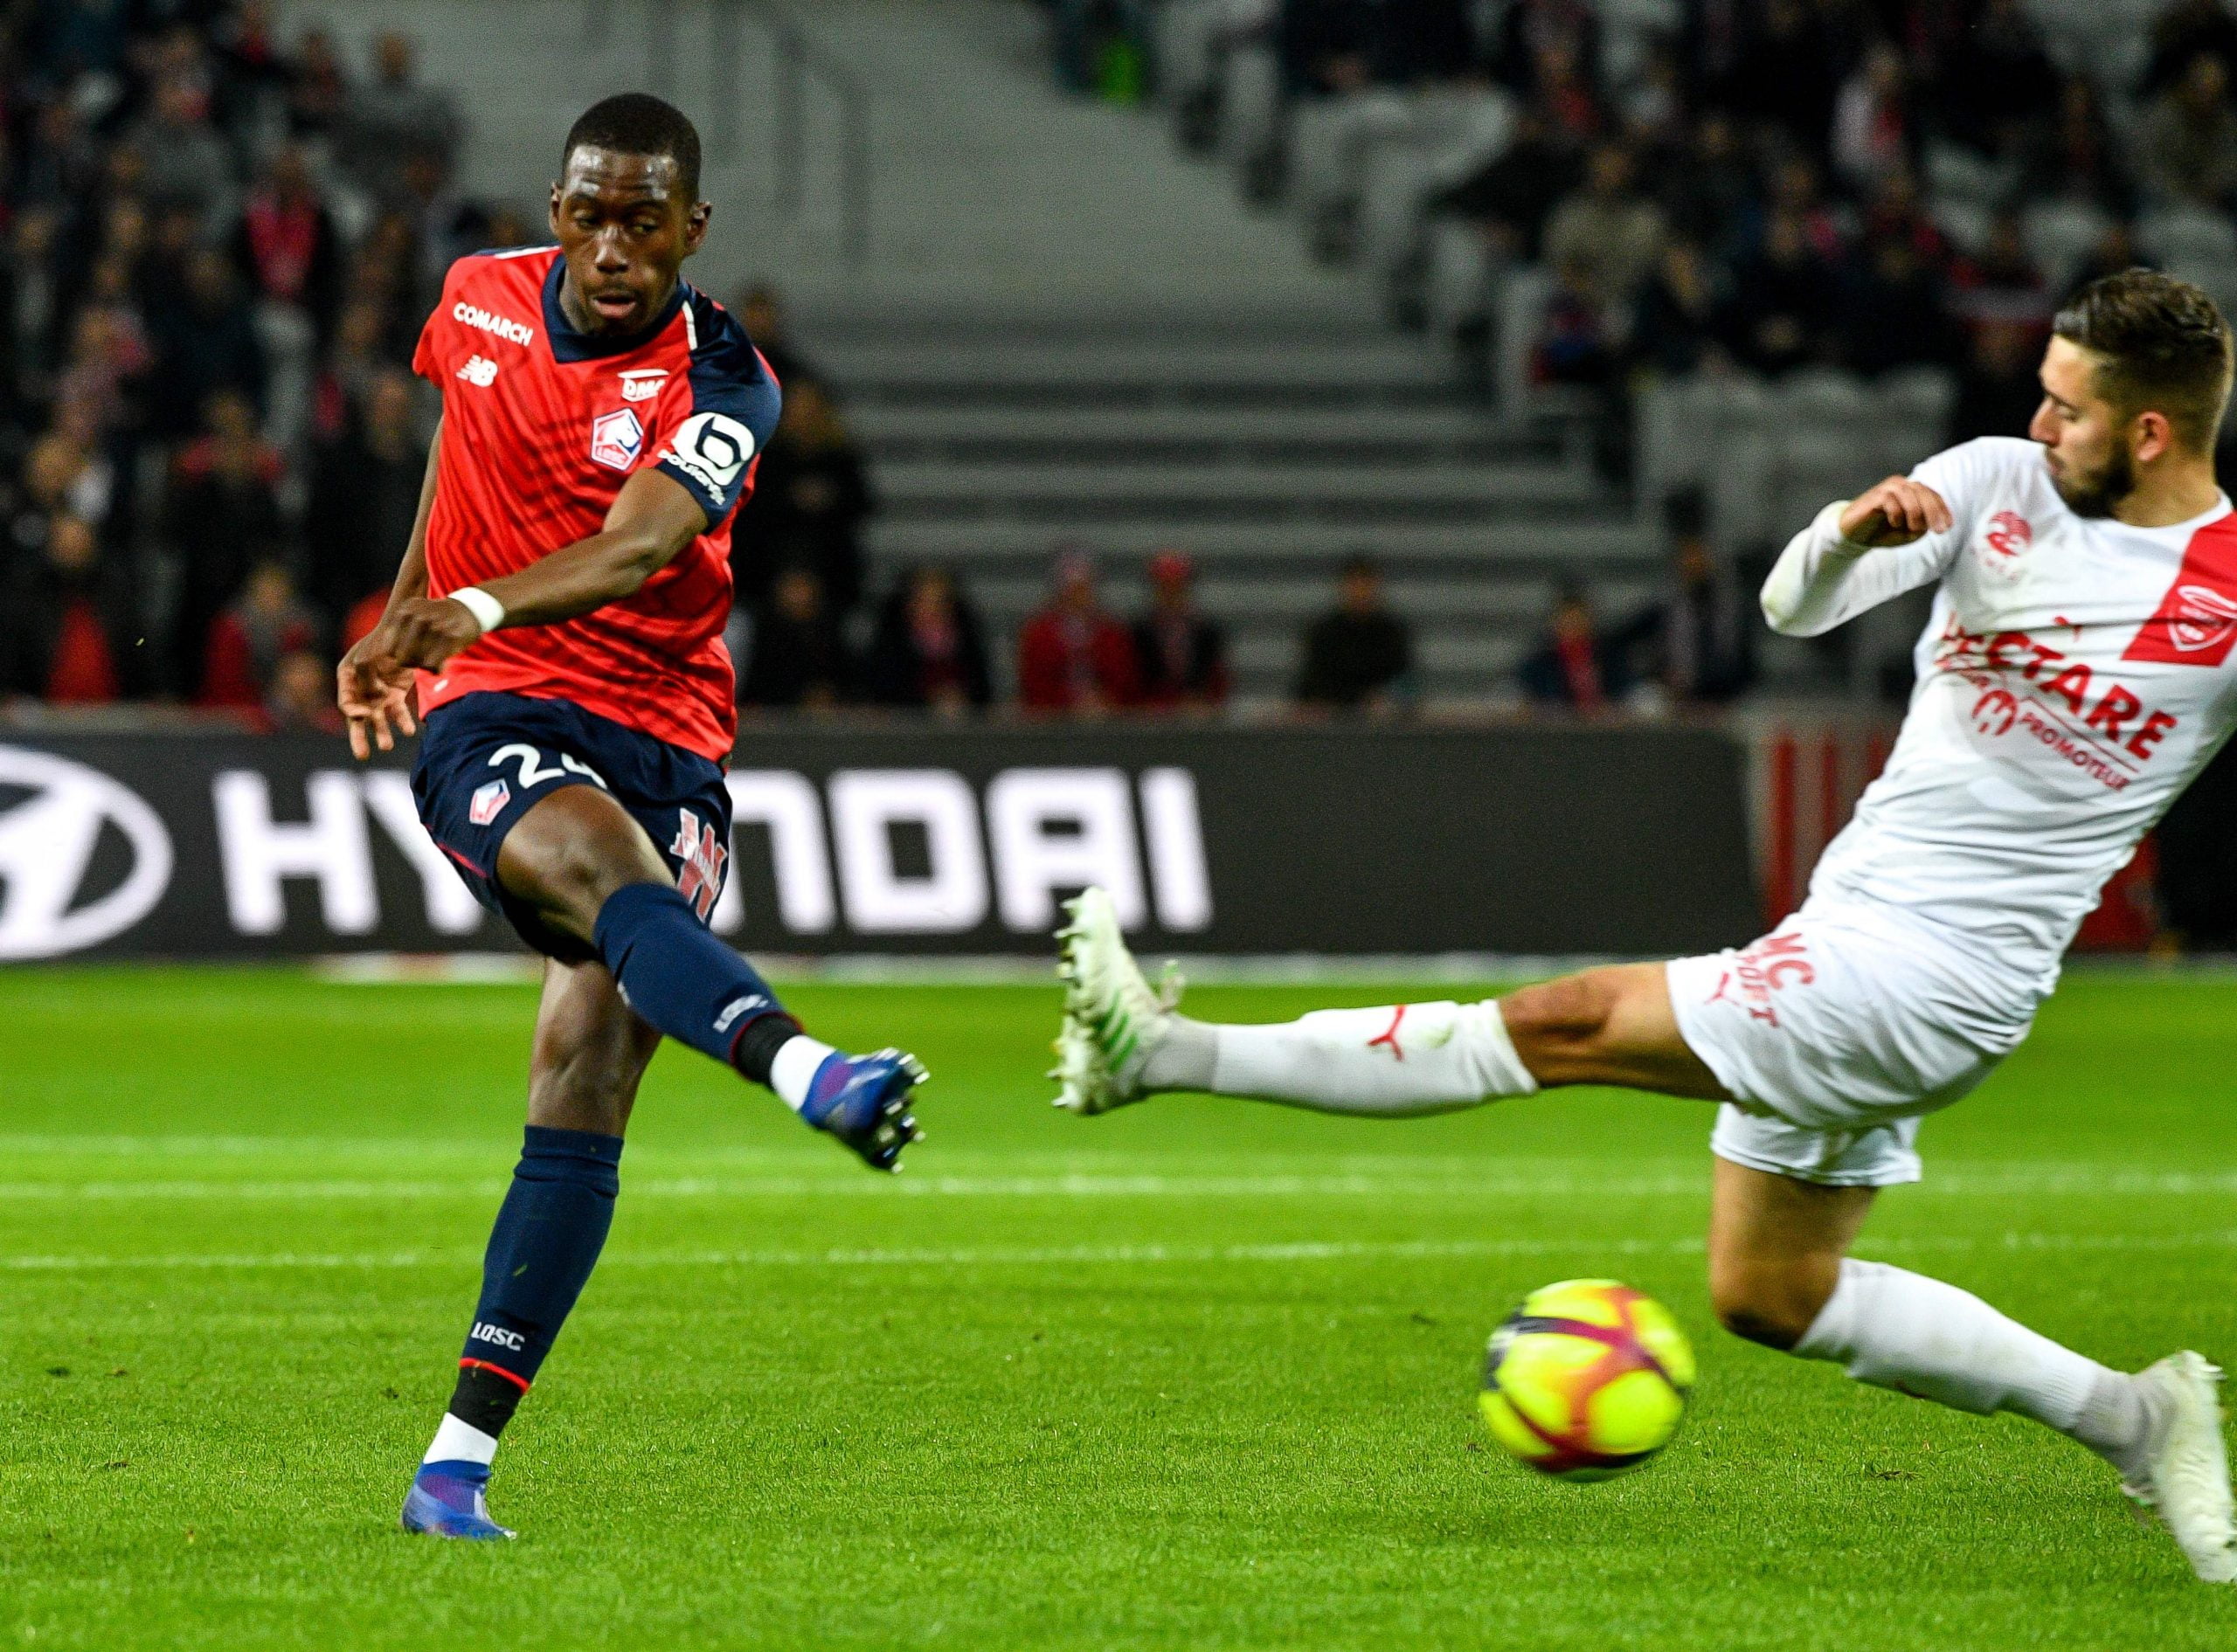 Lille's French midfielder Boubakary Soumare (L) vies with Nîmes' French defender Gaetan Paquiez during the French L1 football match between Lille LOSC and Nimes Olympique at the Pierre-Mauroy Stadium in Villenueve d'Ascq, northern France on April 28, 2019. (Photo by PHILIPPE HUGUEN / AFP)        (Photo credit should read PHILIPPE HUGUEN/AFP/Getty Images)